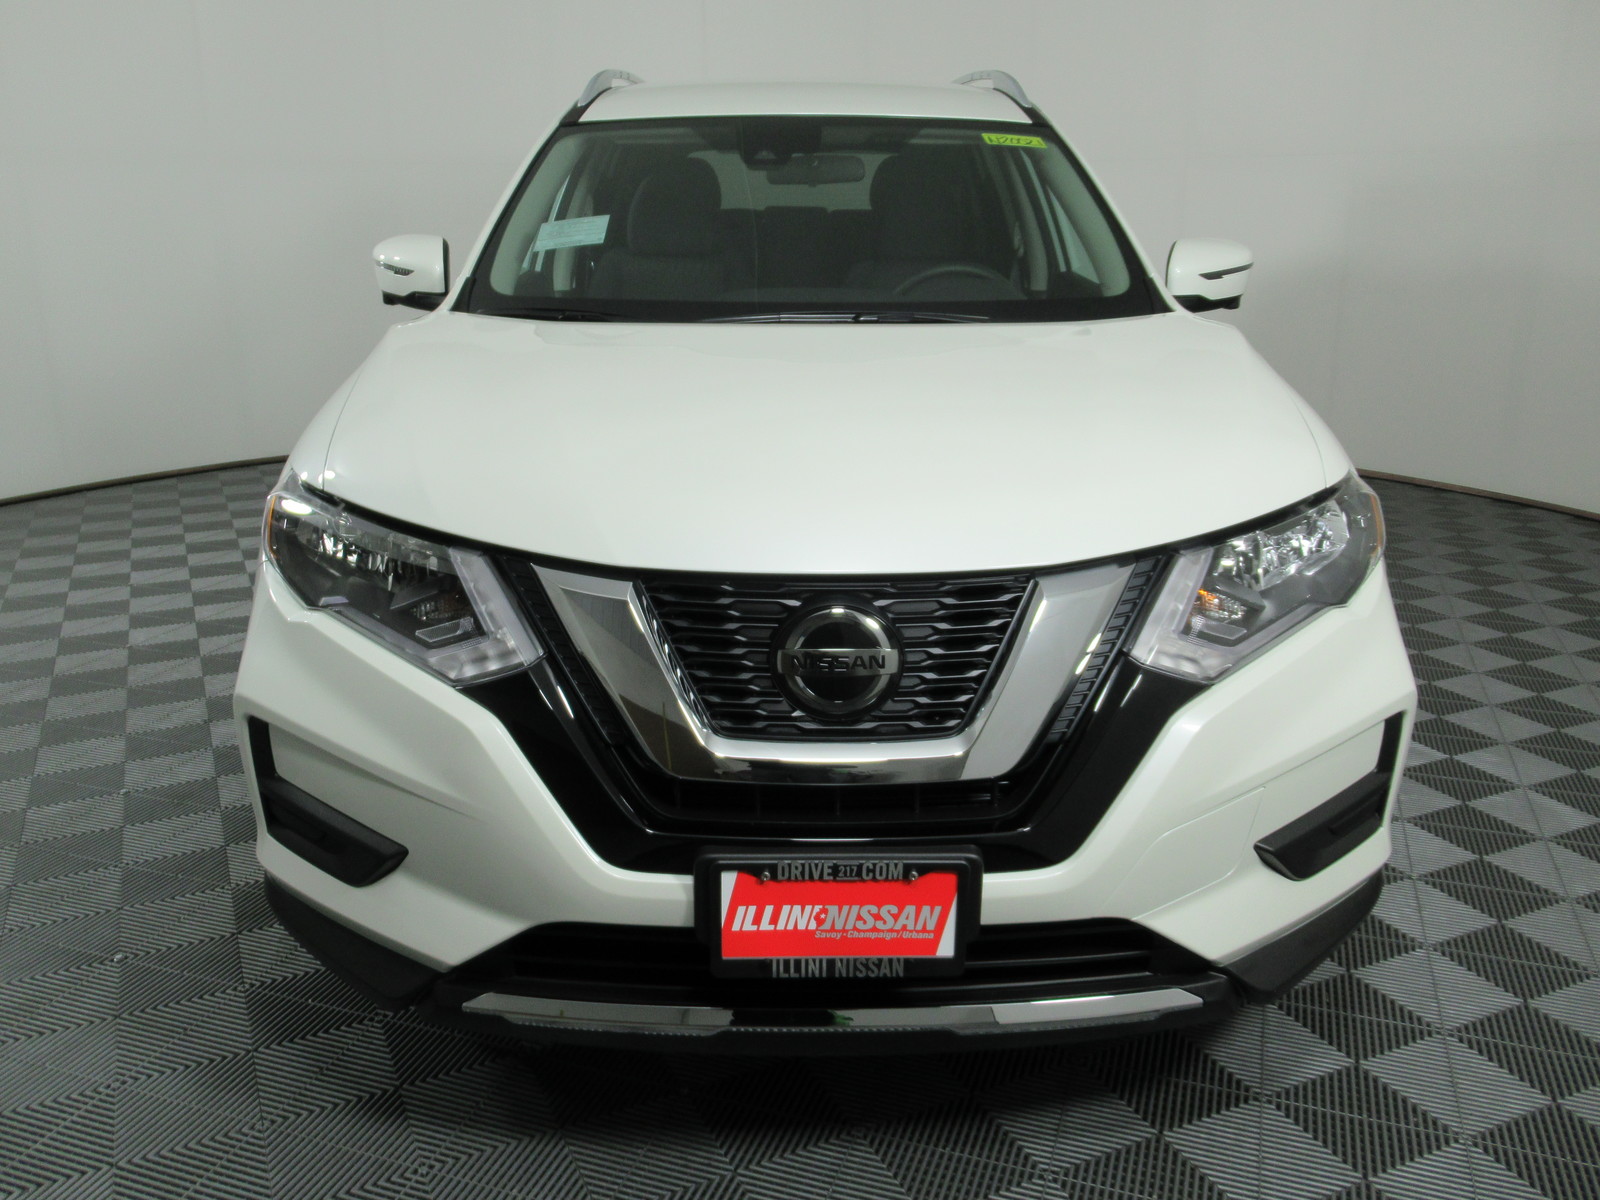 New 2020 Nissan Rogue FWD SV Sport Utility in Savoy N20021 Drive217